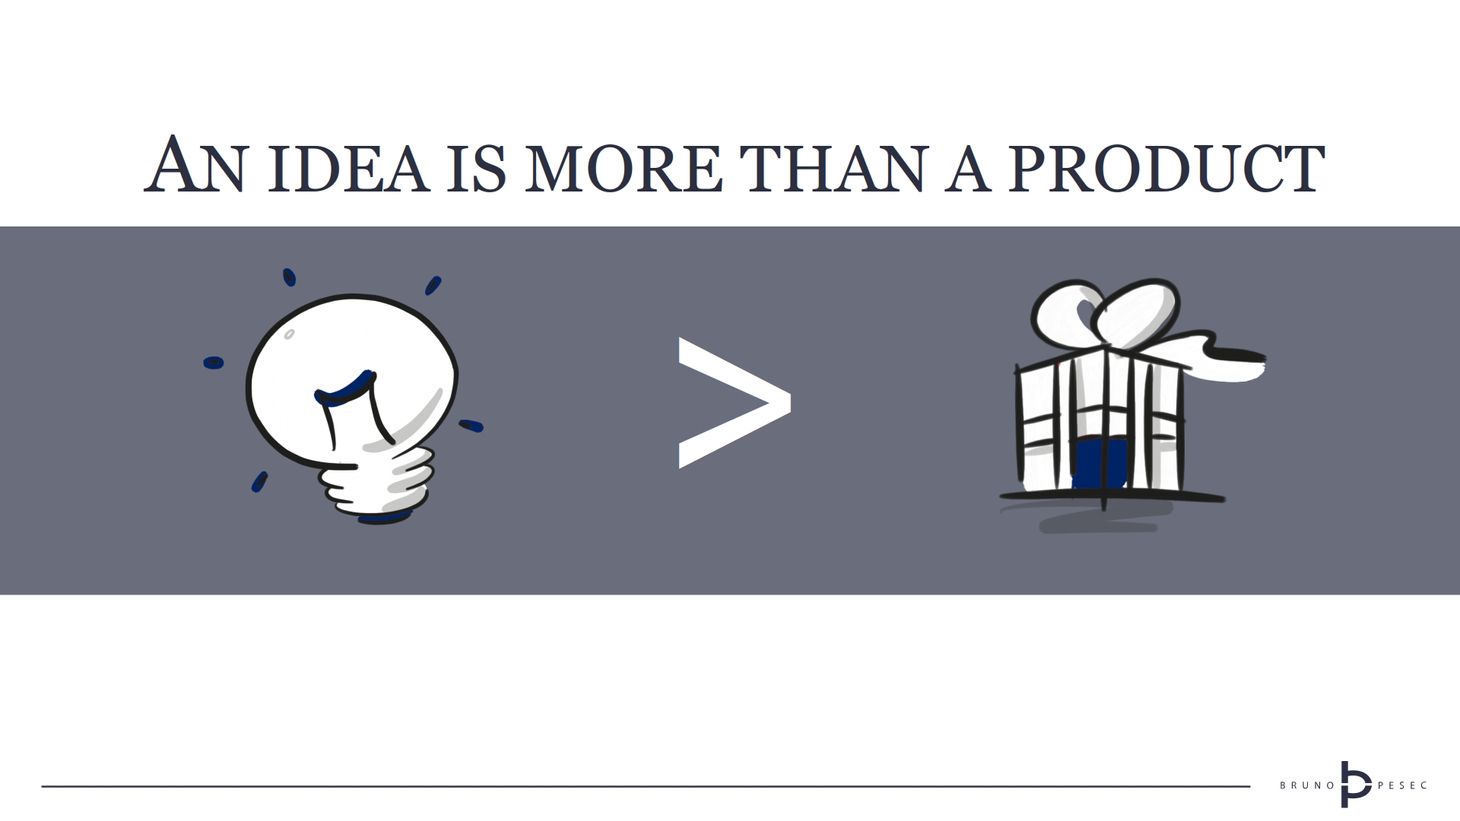 An idea is more than a product